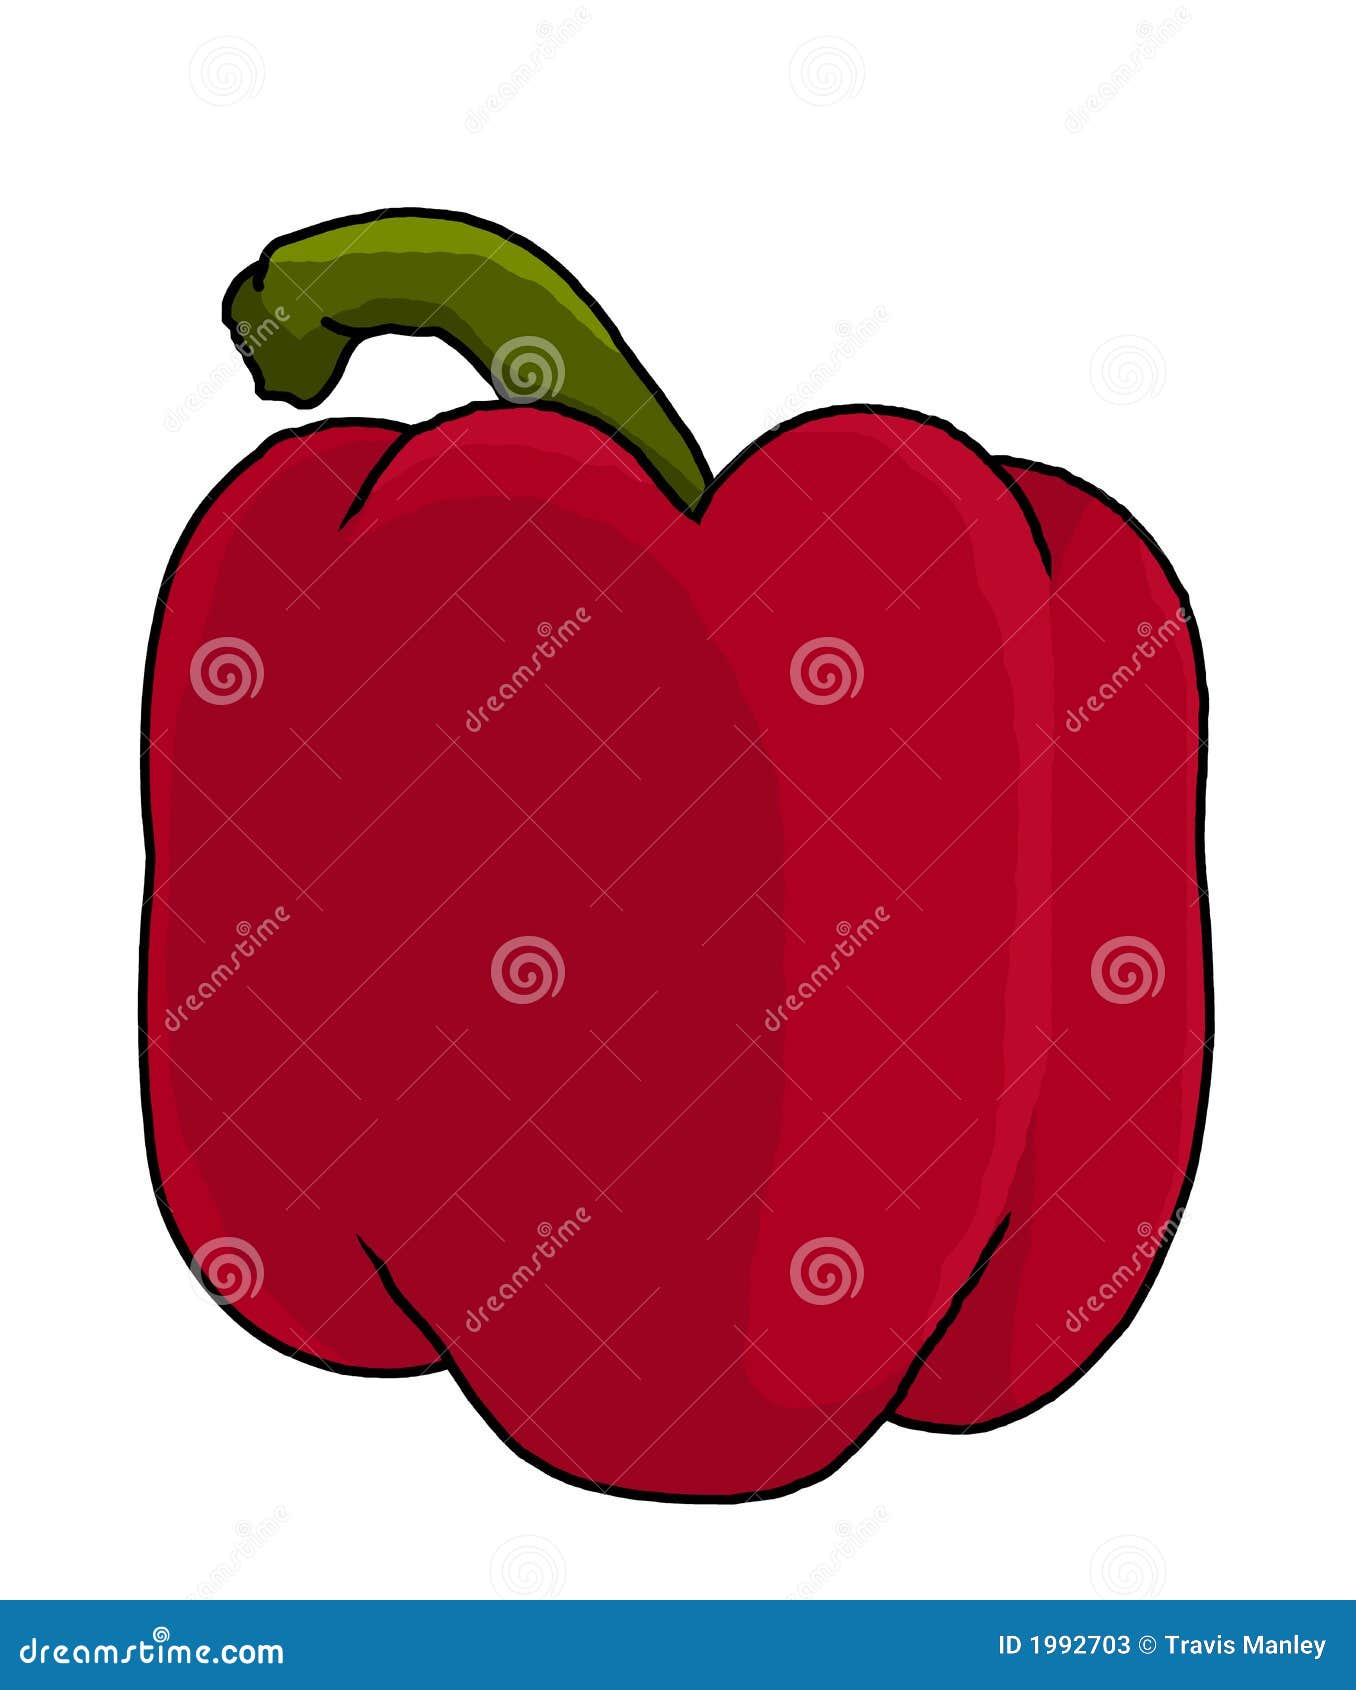 Red Bell Pepper Illustration Stock Photos - Image: 1992703